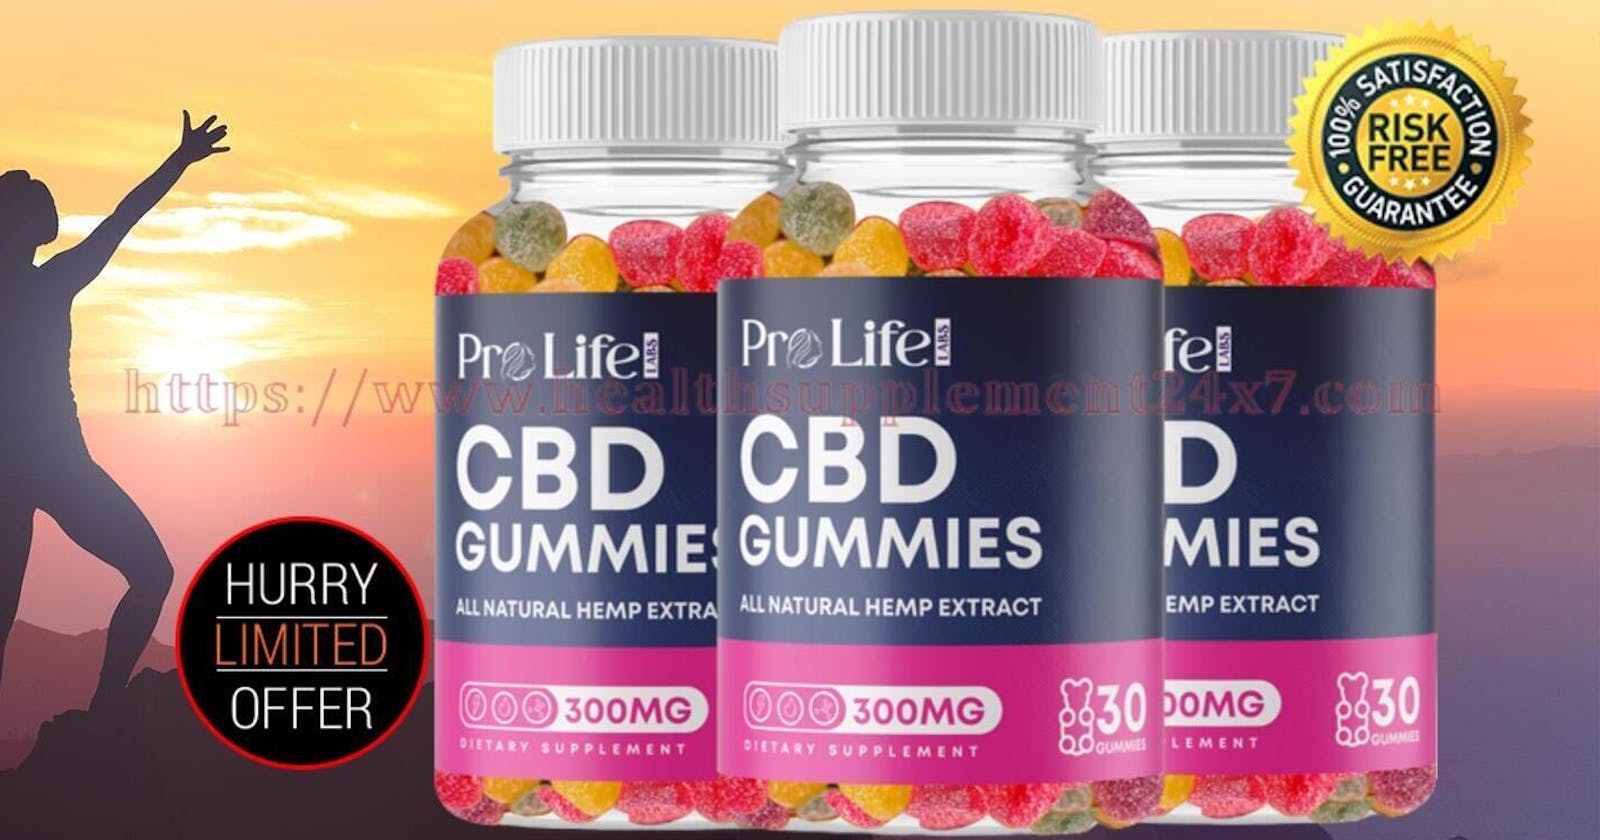 ProLife CBD Gummies (Consumer Feedbacks) Safe, Non-Habit Forming, Effective and Relieves Anxiety & Stress [Hoax Alert]